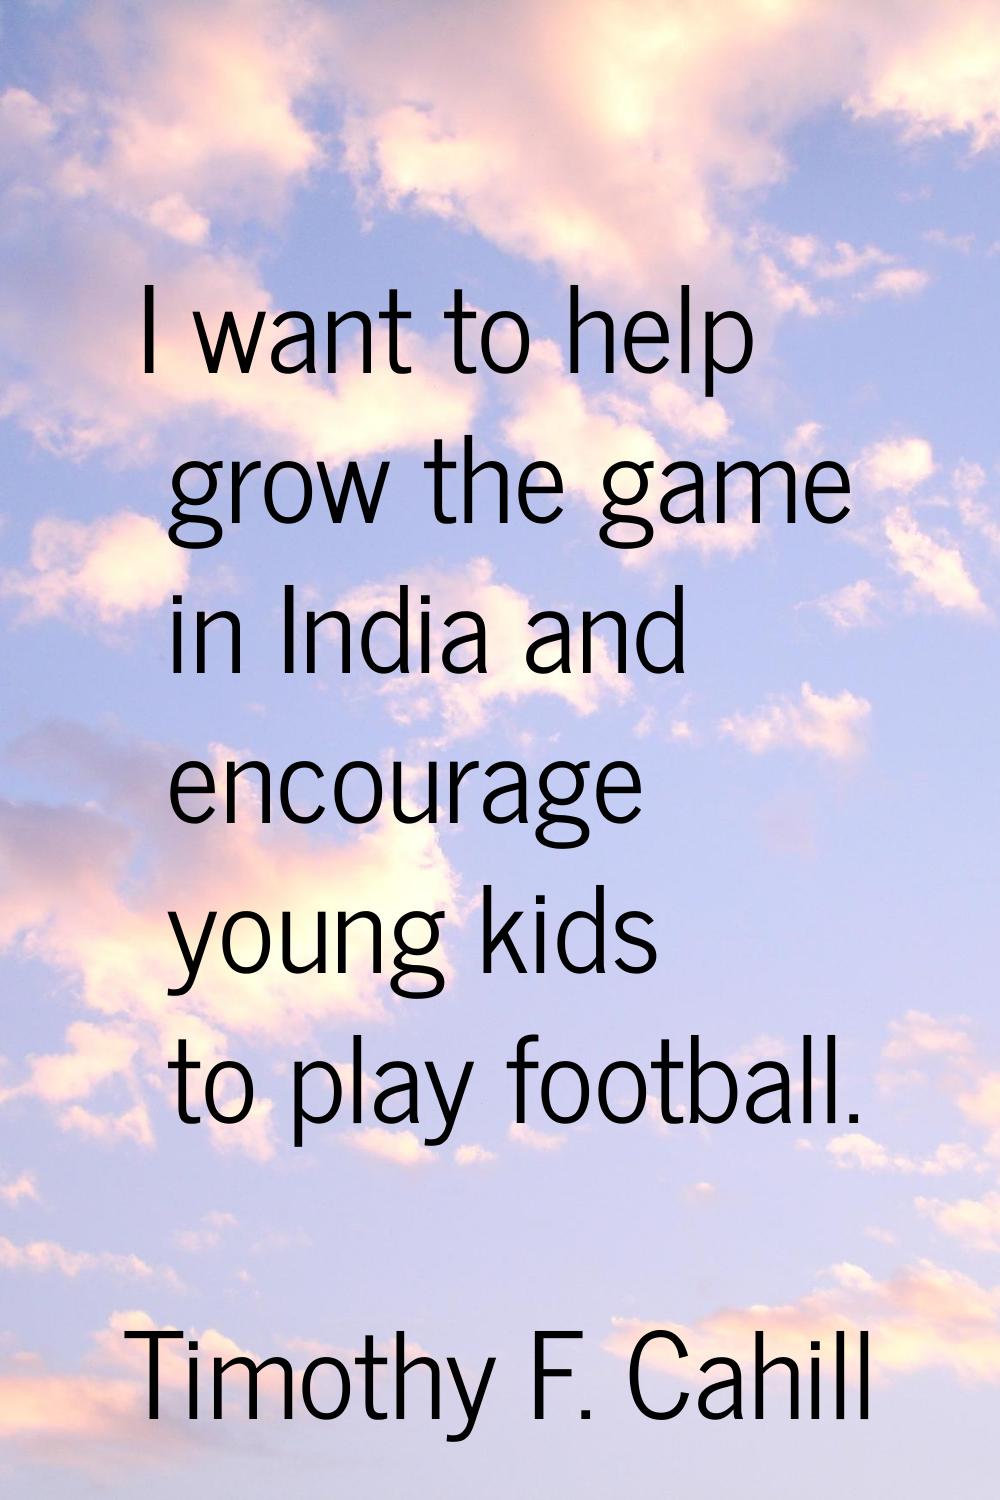 I want to help grow the game in India and encourage young kids to play football.